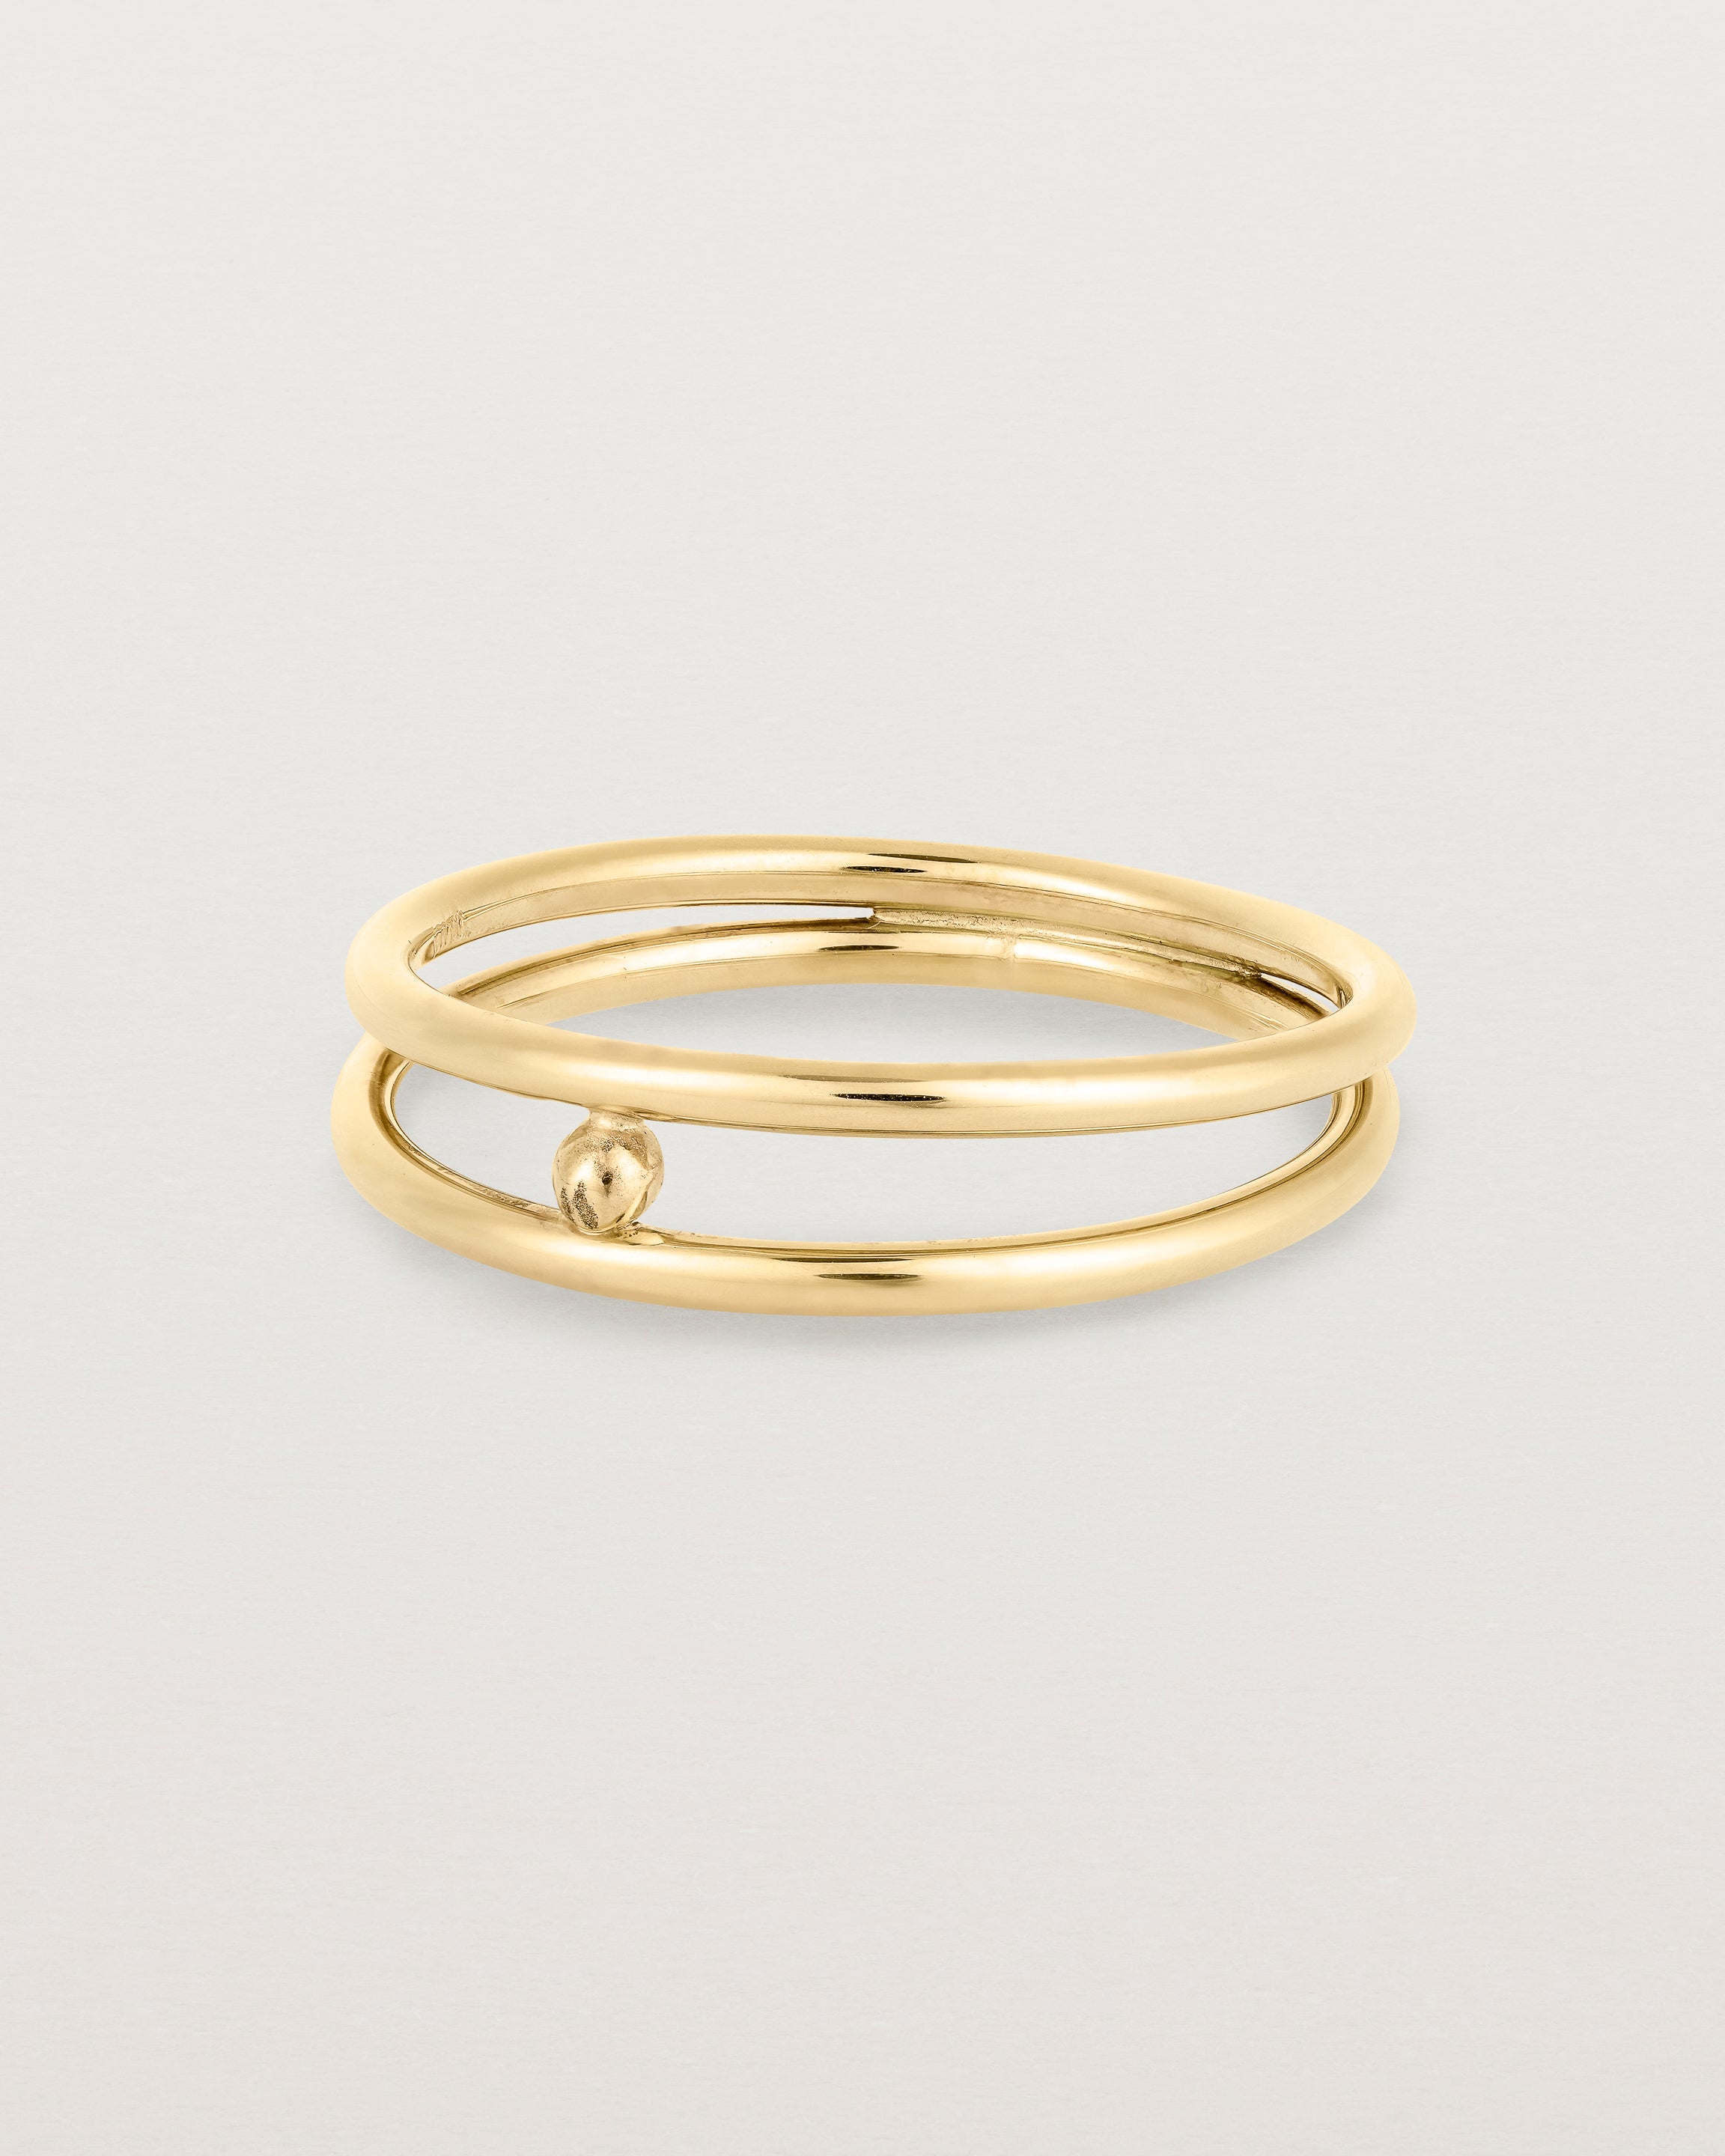 Angled view of the Double Reliquum Ring in Yellow Gold.